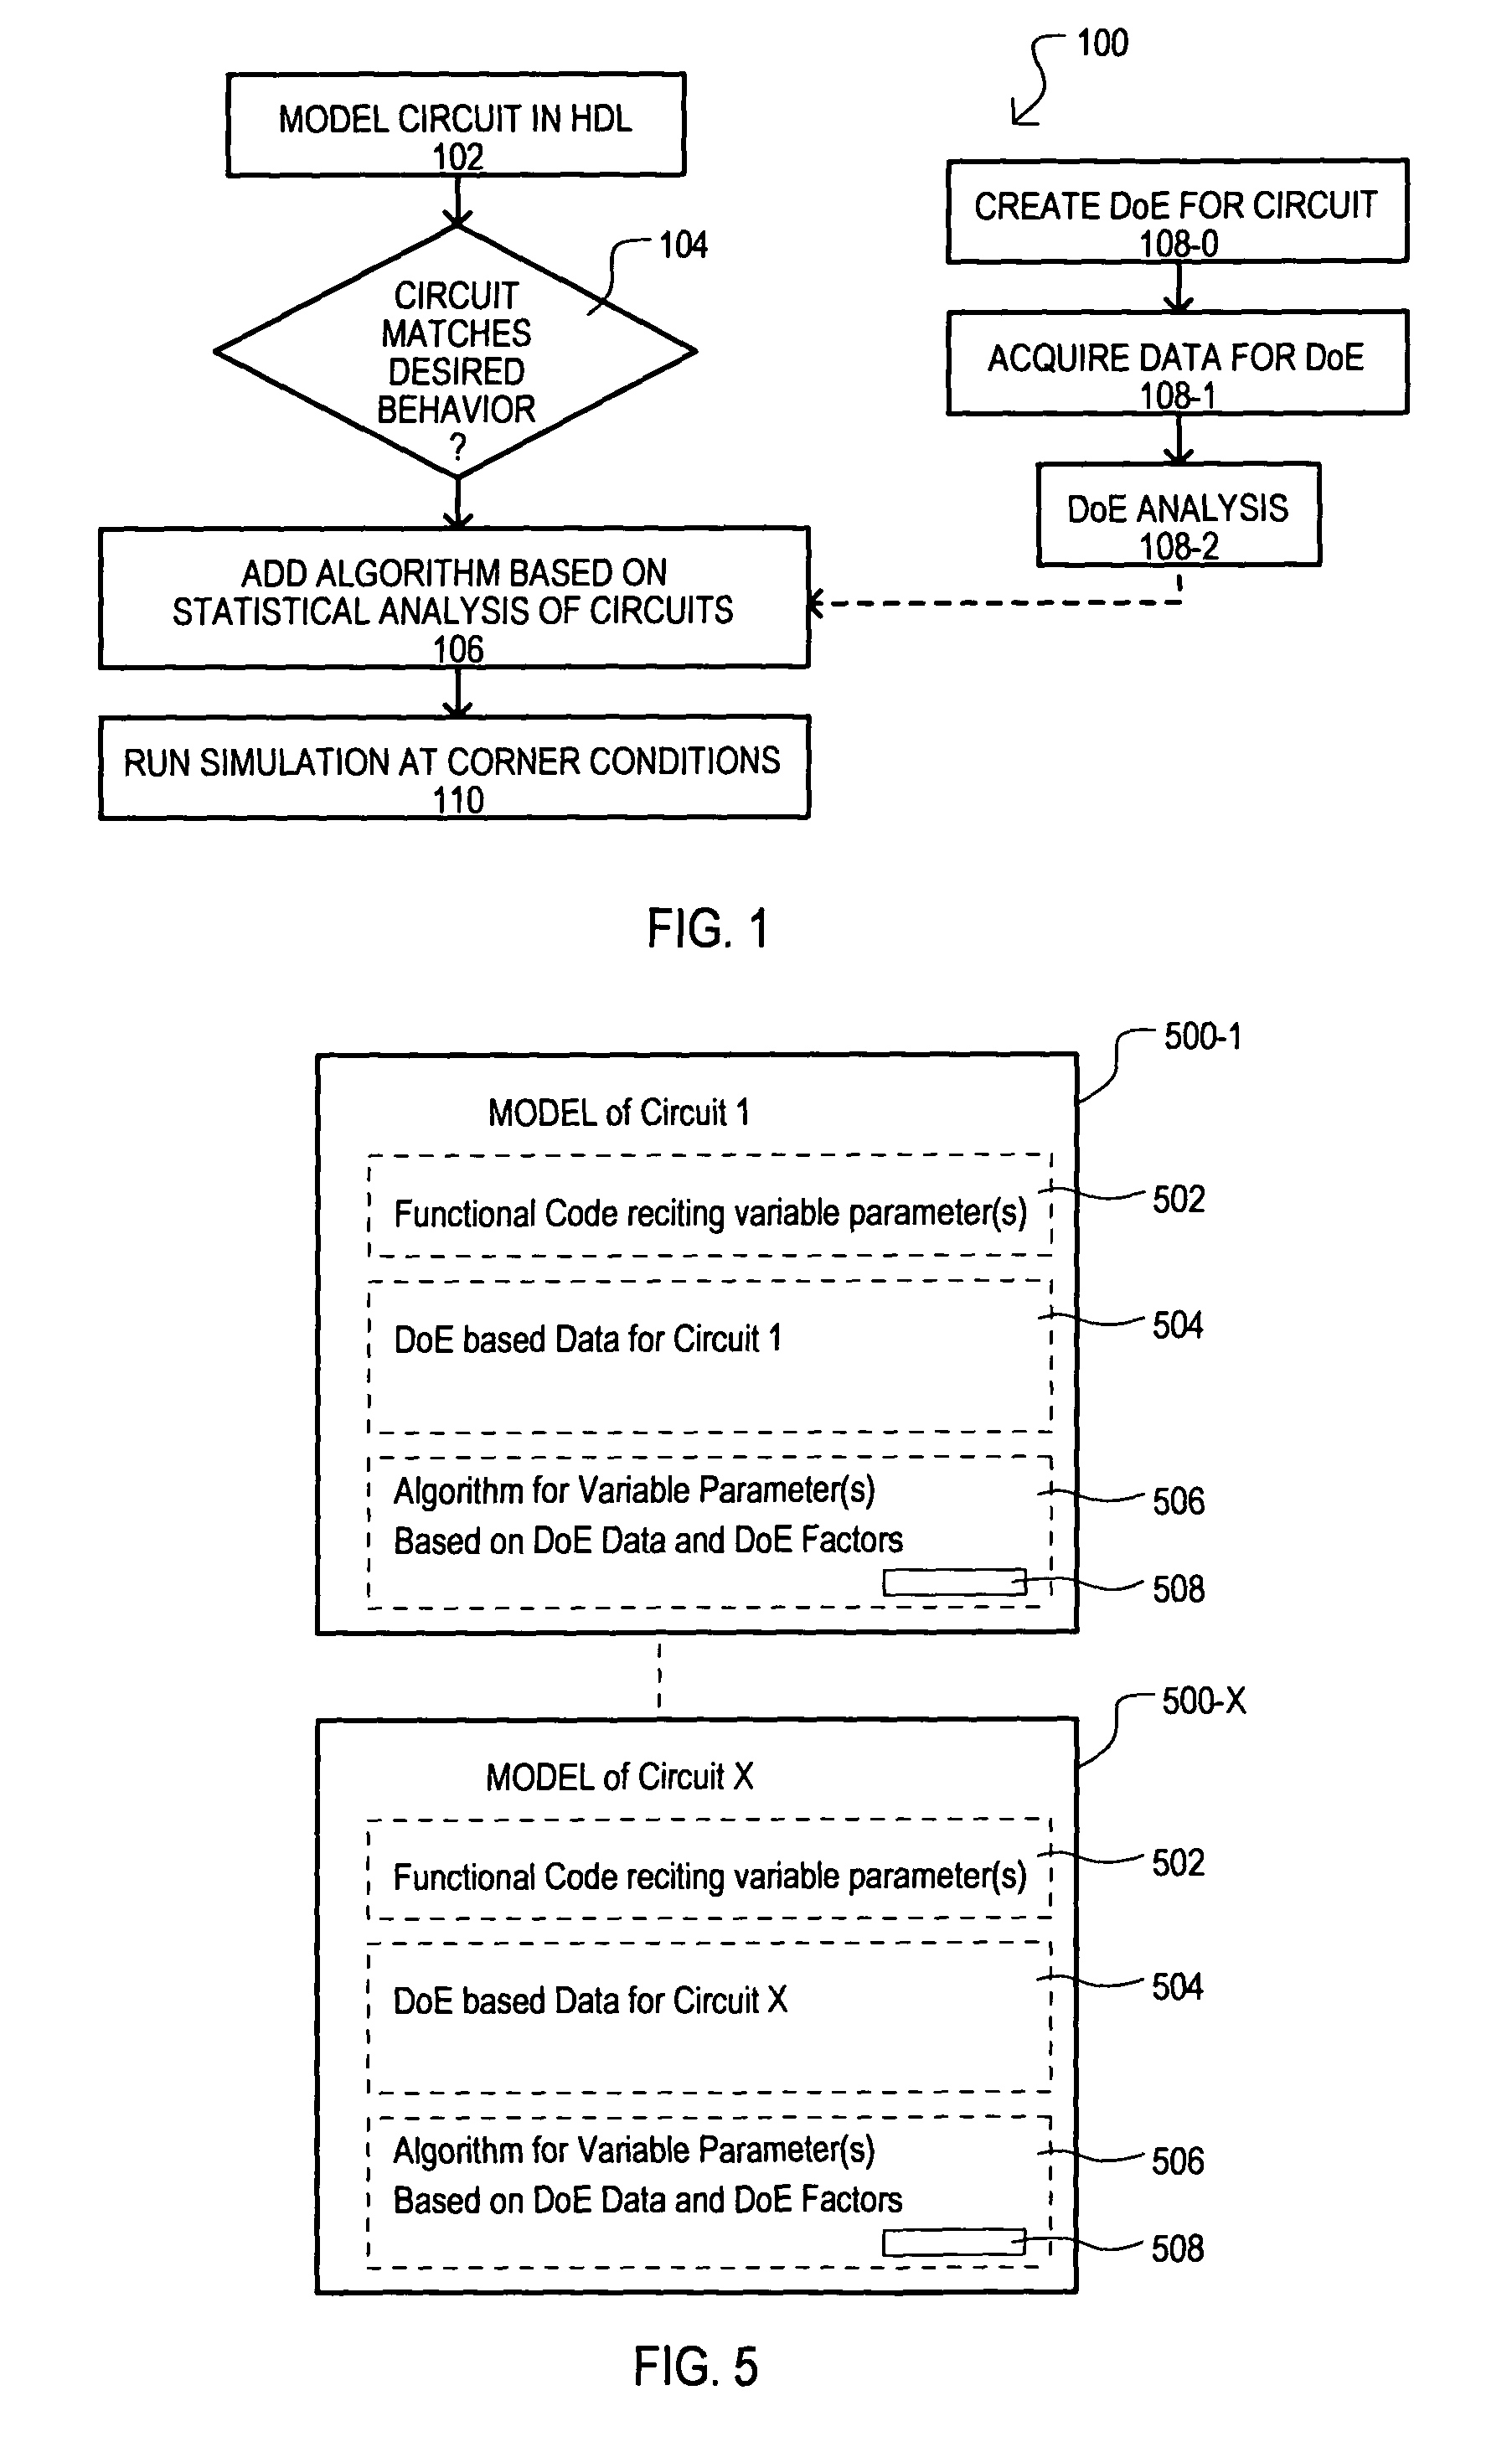 Hardware description language (HDL) incorporating statistically derived data and related methods